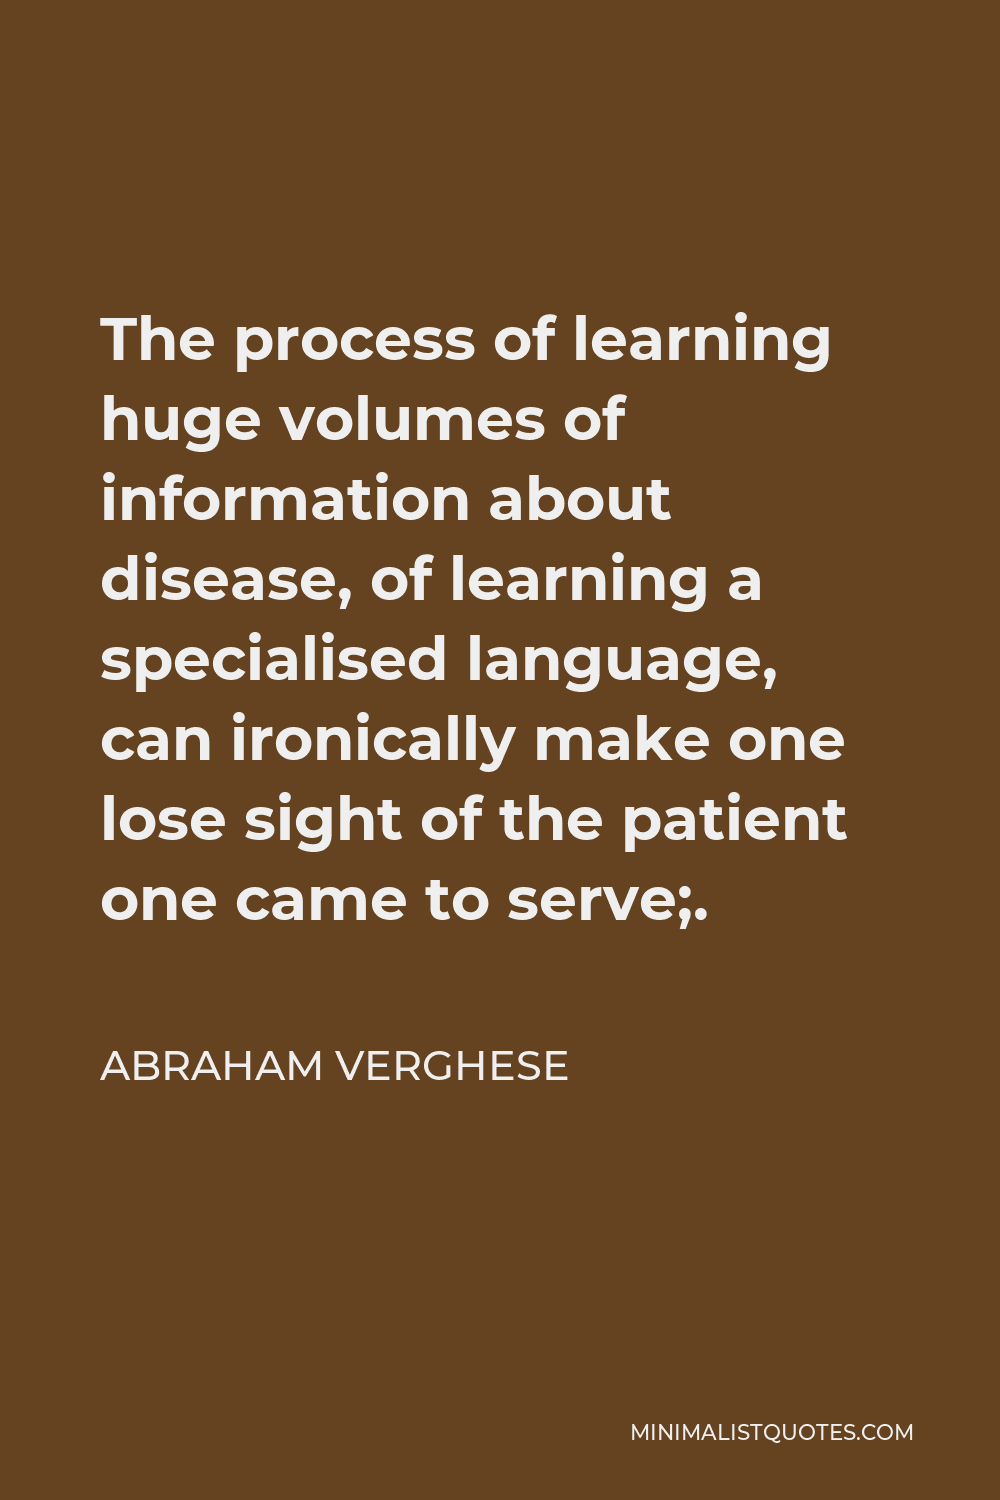 Abraham Verghese Quote - The process of learning huge volumes of information about disease, of learning a specialised language, can ironically make one lose sight of the patient one came to serve;.